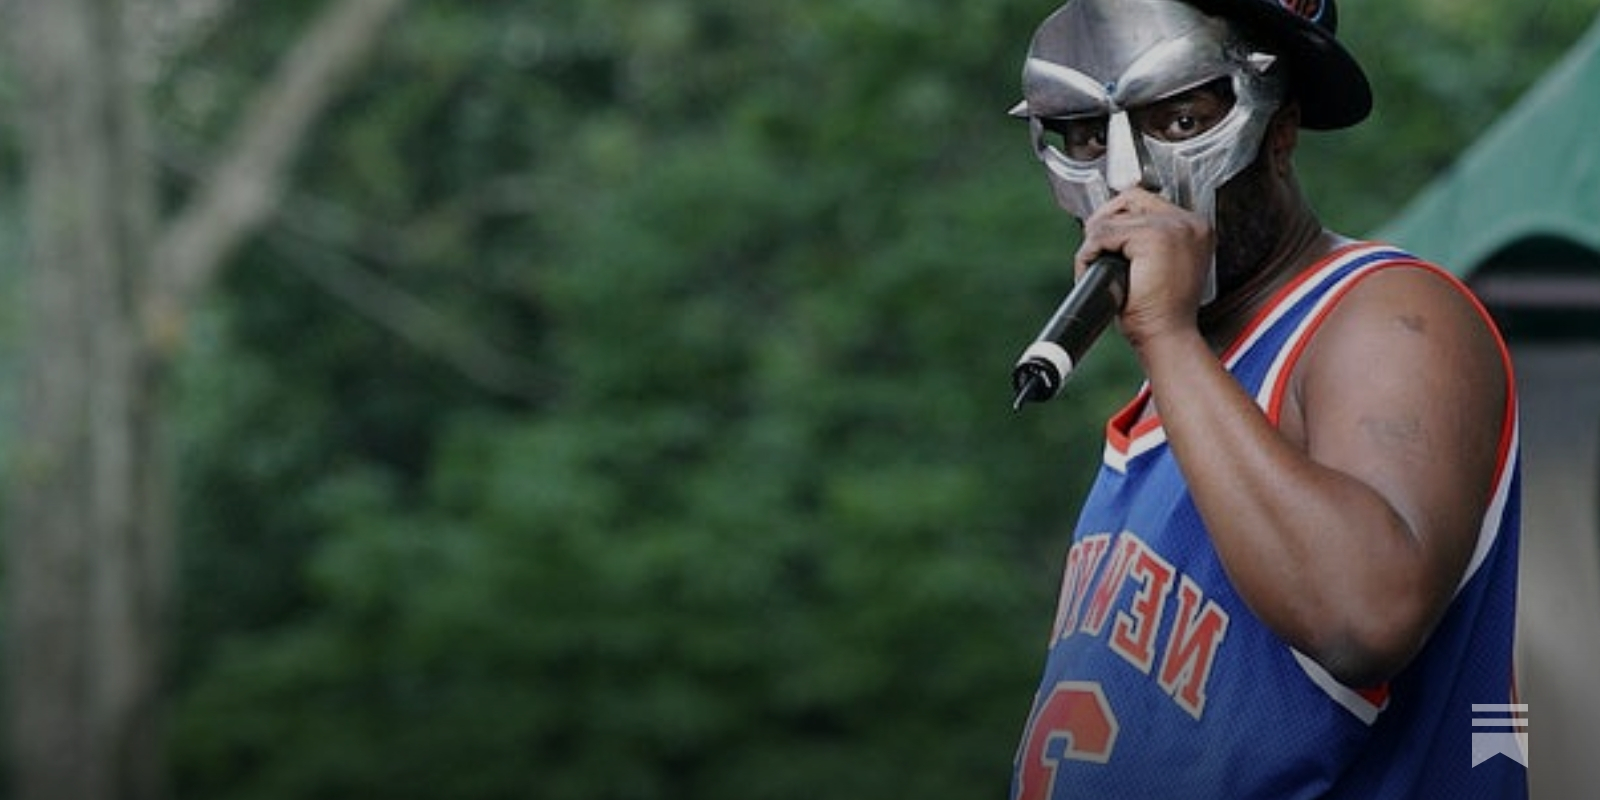 That time MF DOOM brought an imposter to Toronto